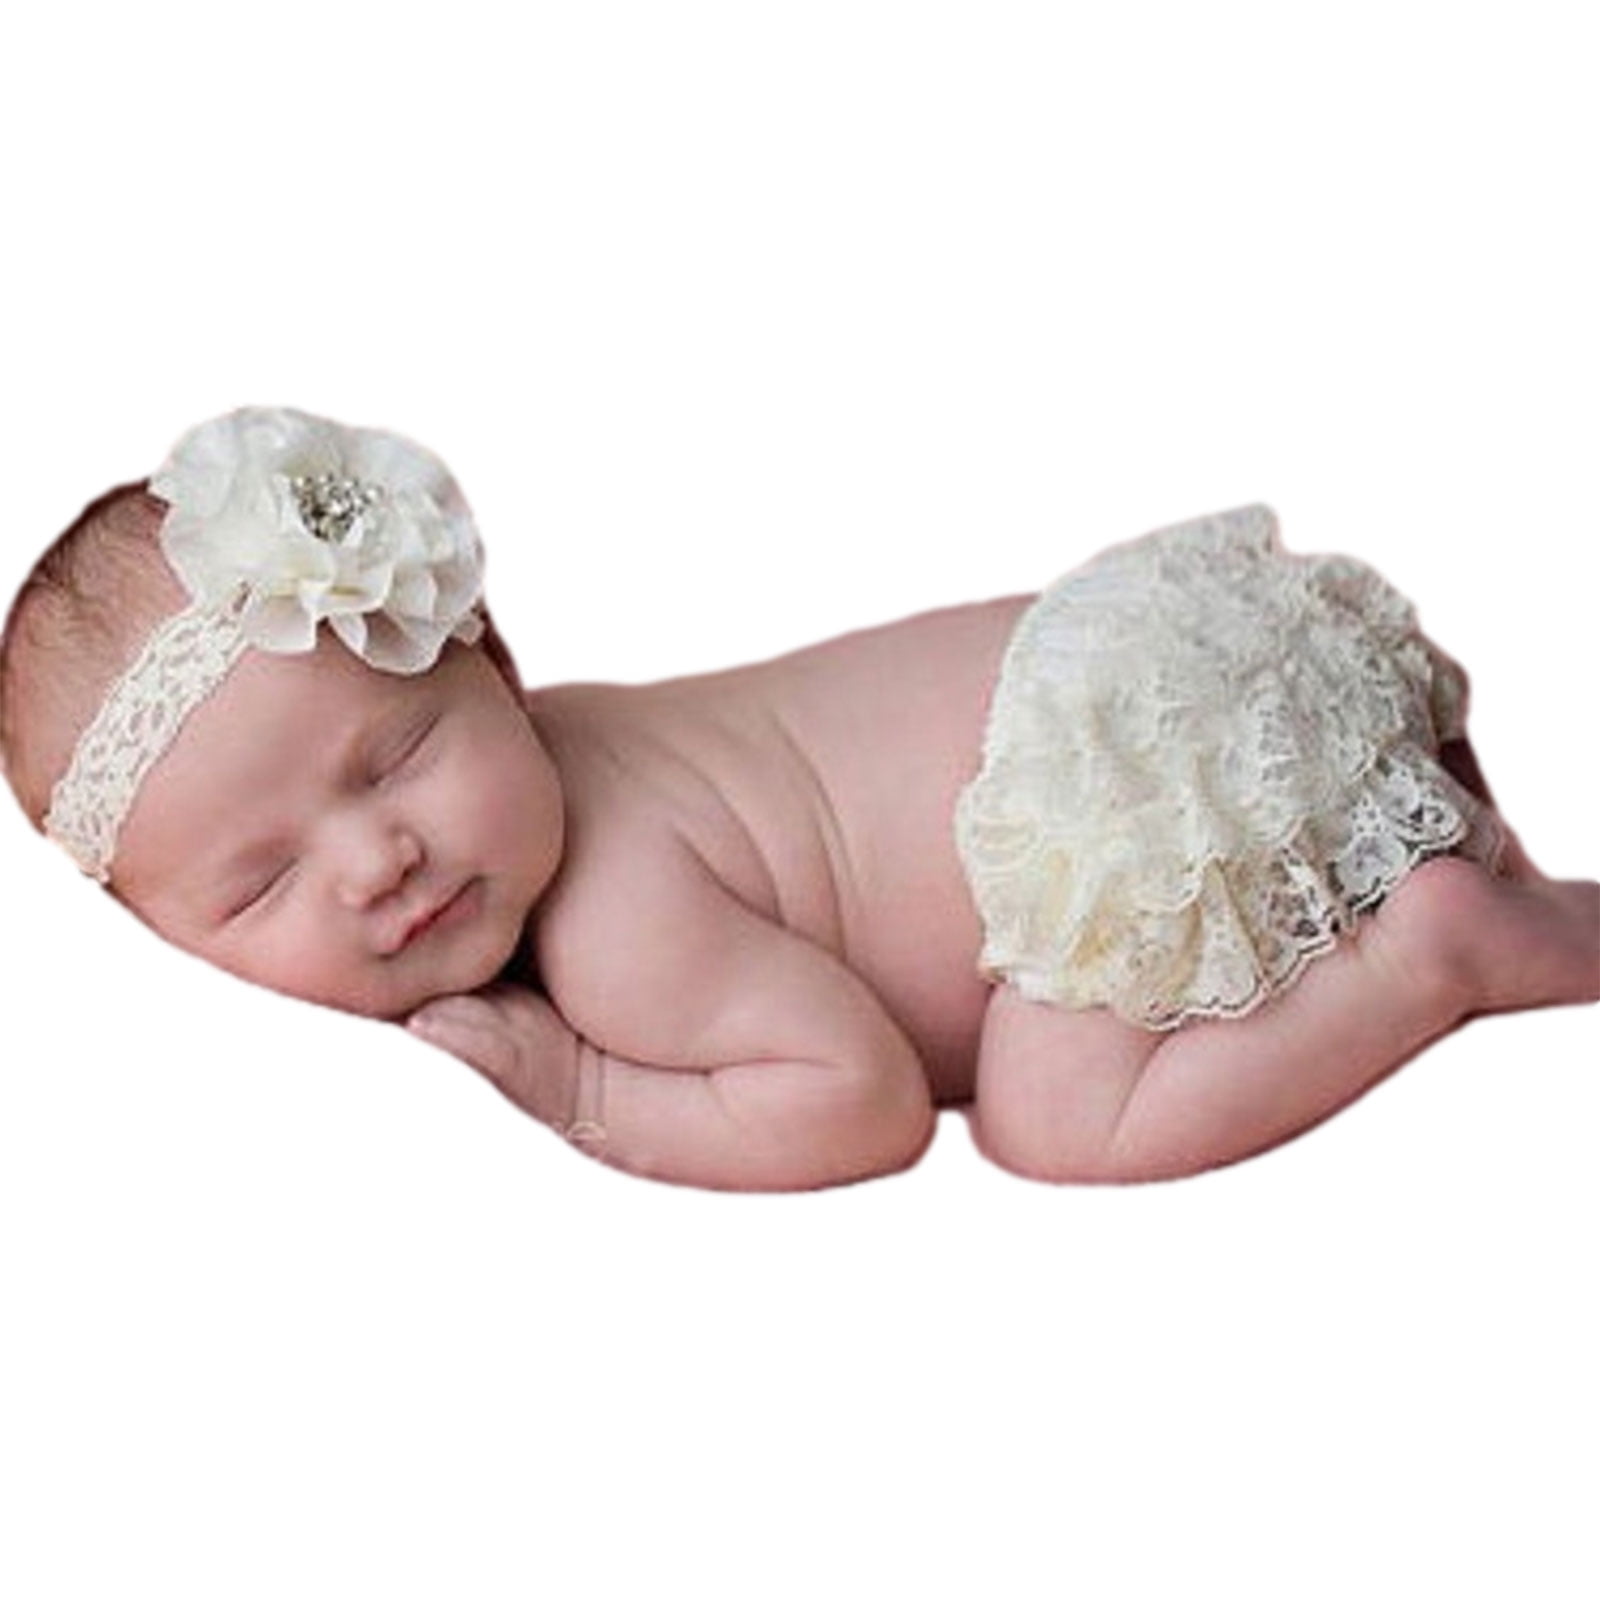 Flower Headband Photography Prop Infant Baby Girls Bowknot Bloomer Diaper Cover 